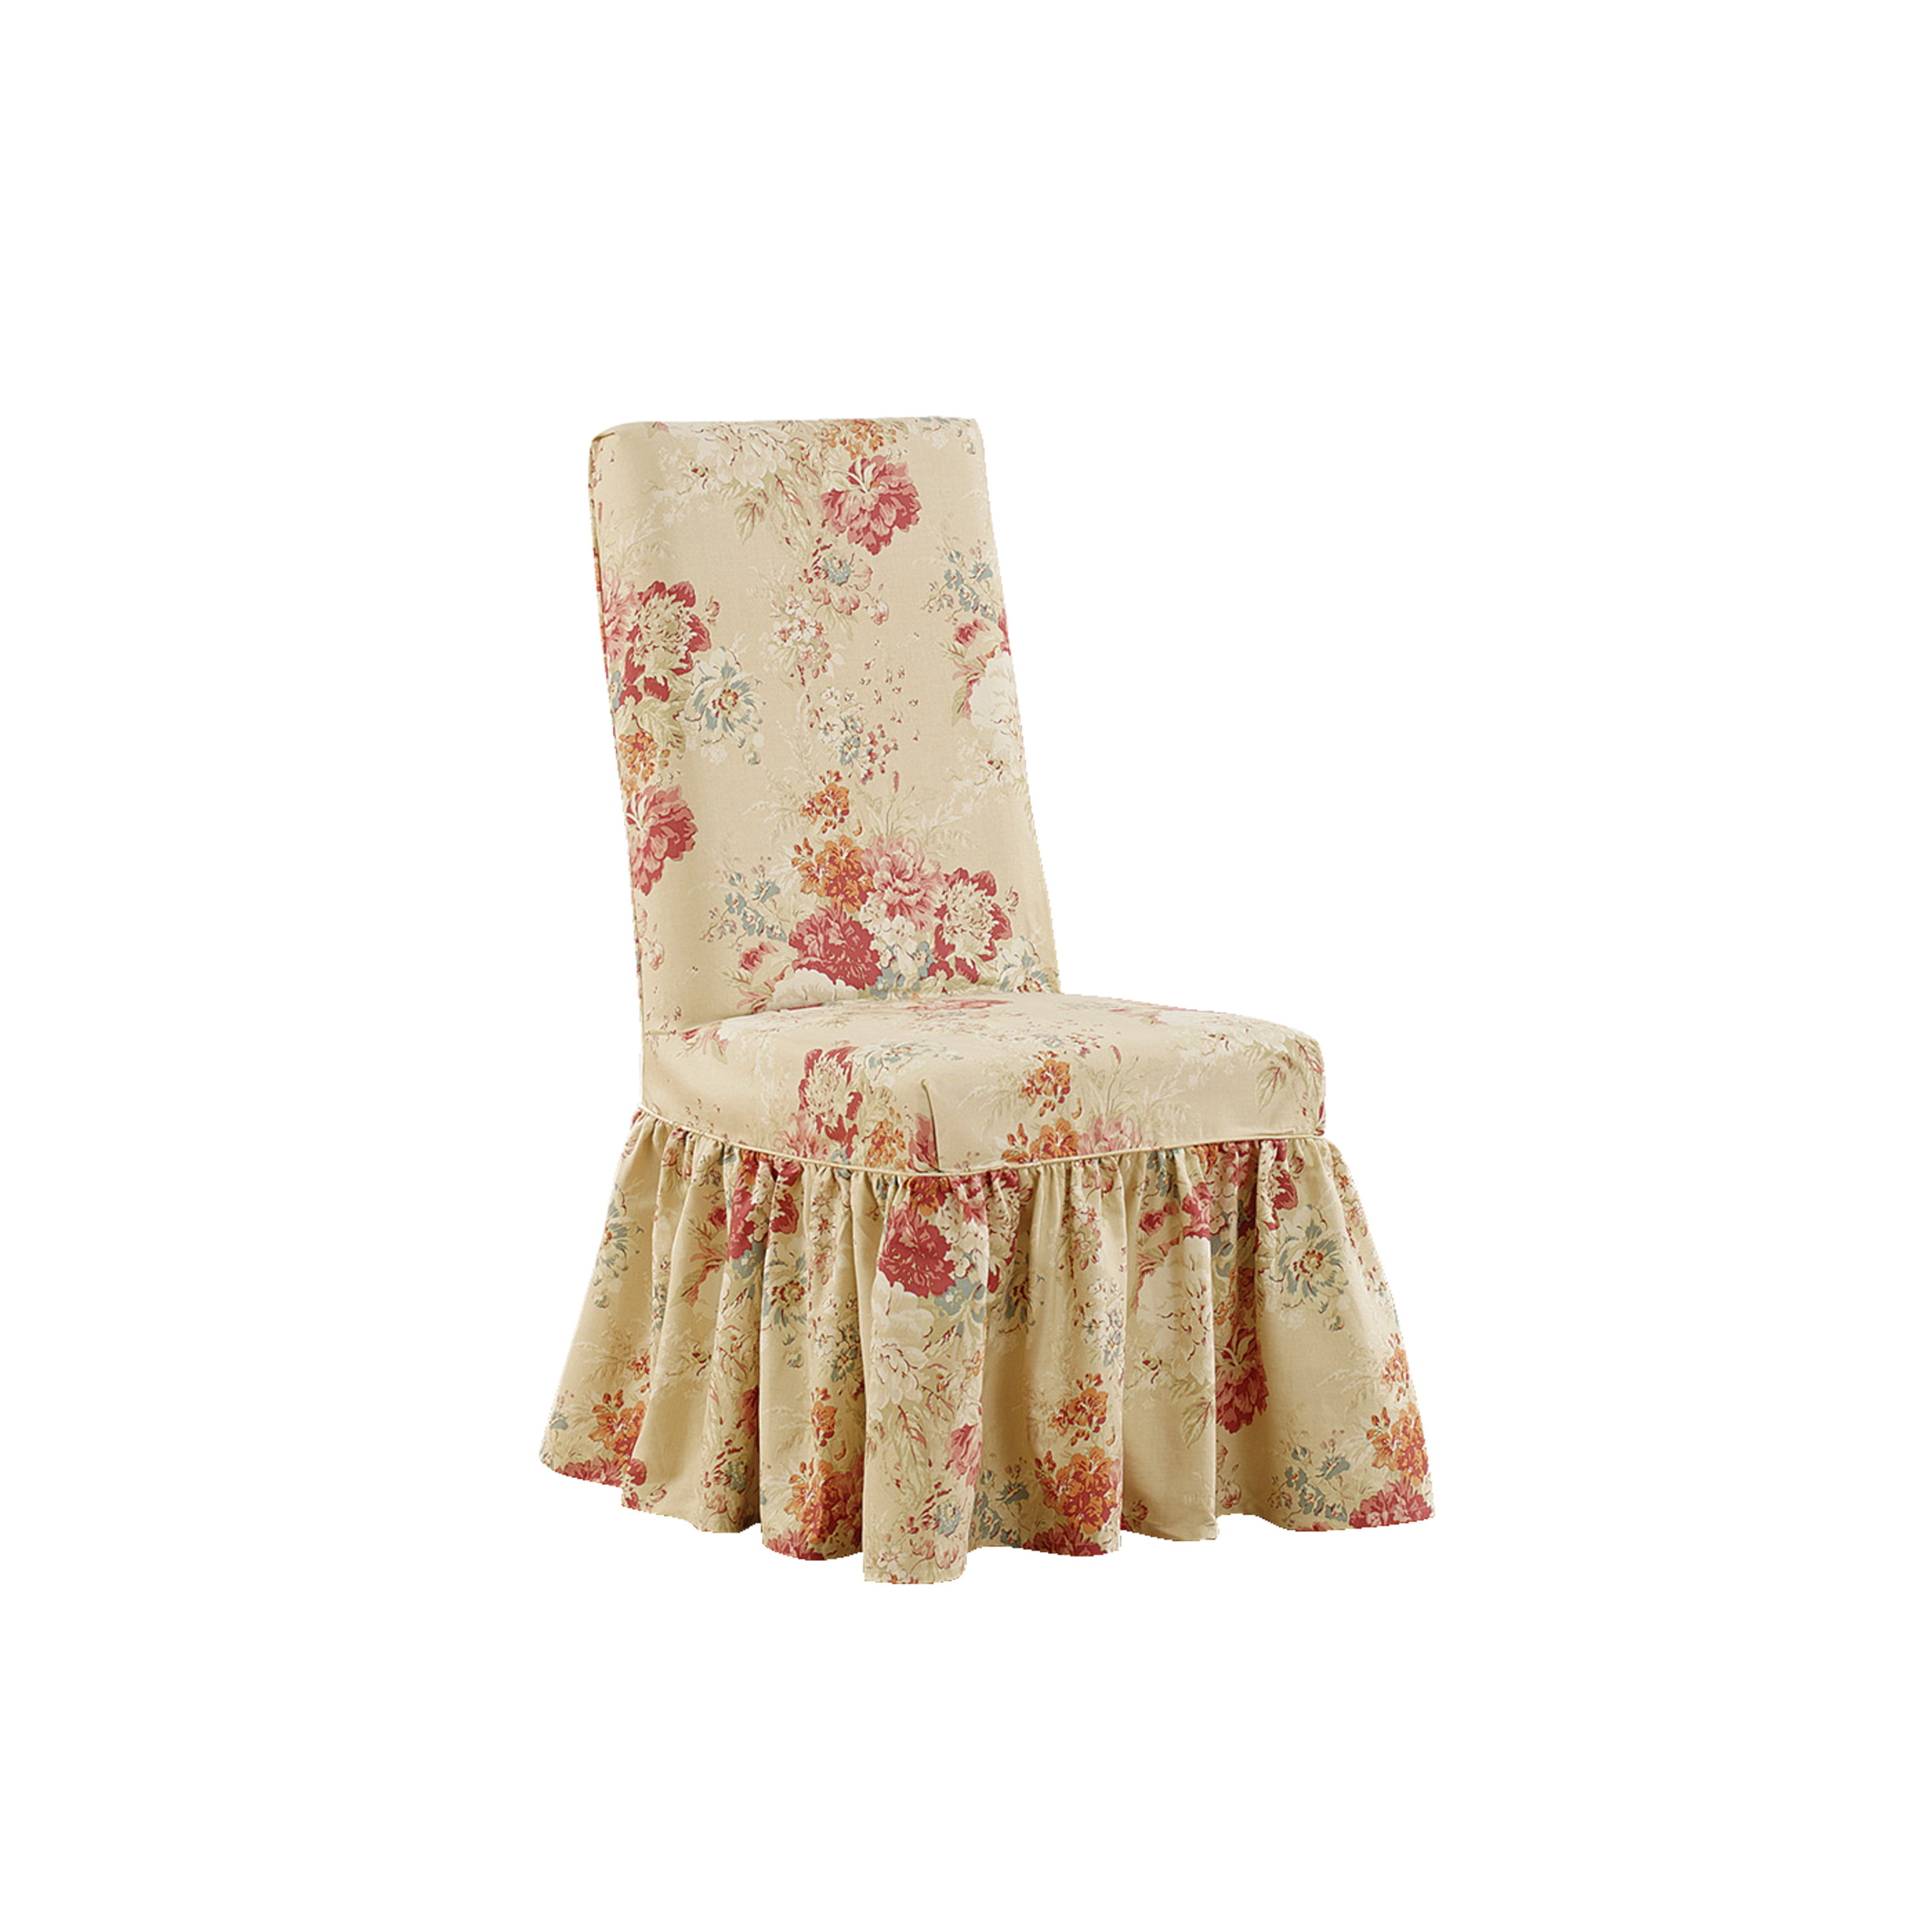 Dining room spandex chair cover - Valley Tablecloths